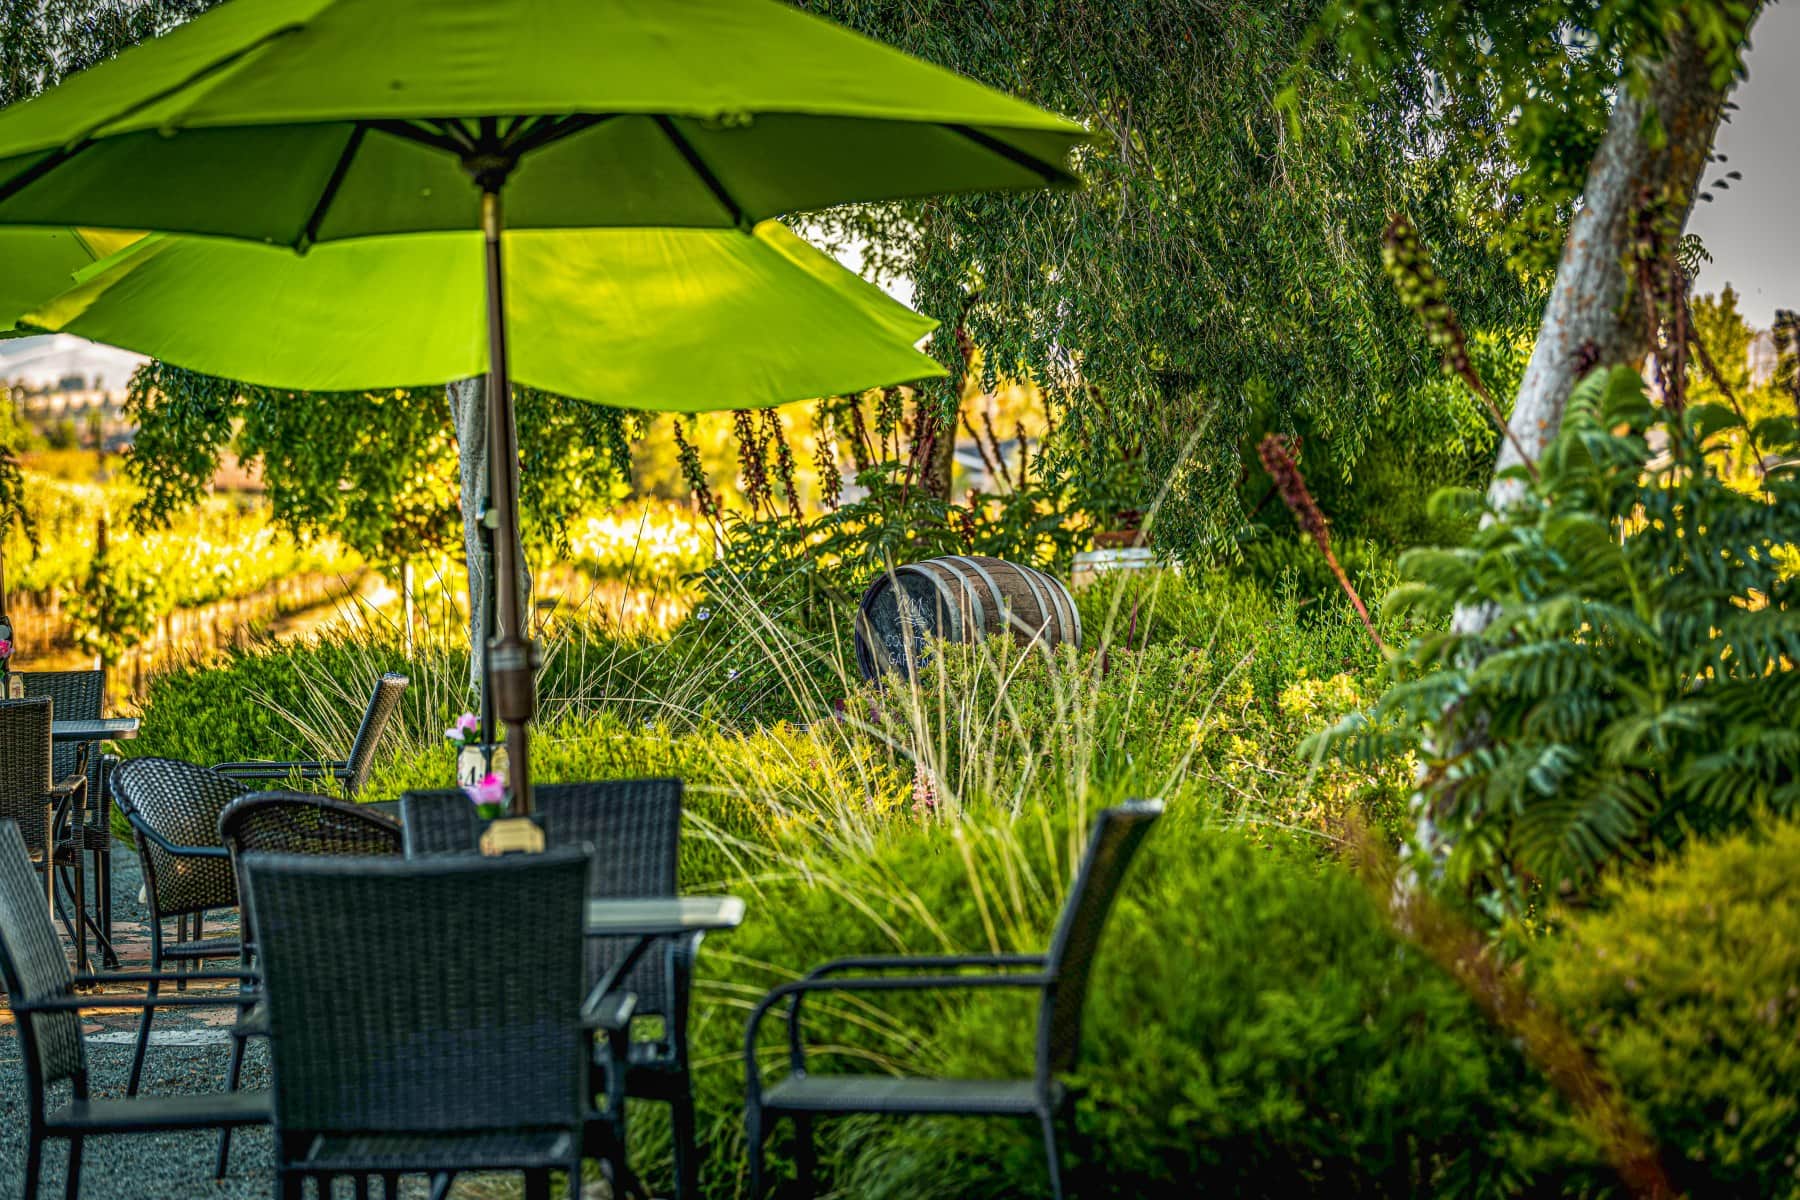 RM picnic tables with bright green umbrellas in the native California plant garden with used barrels